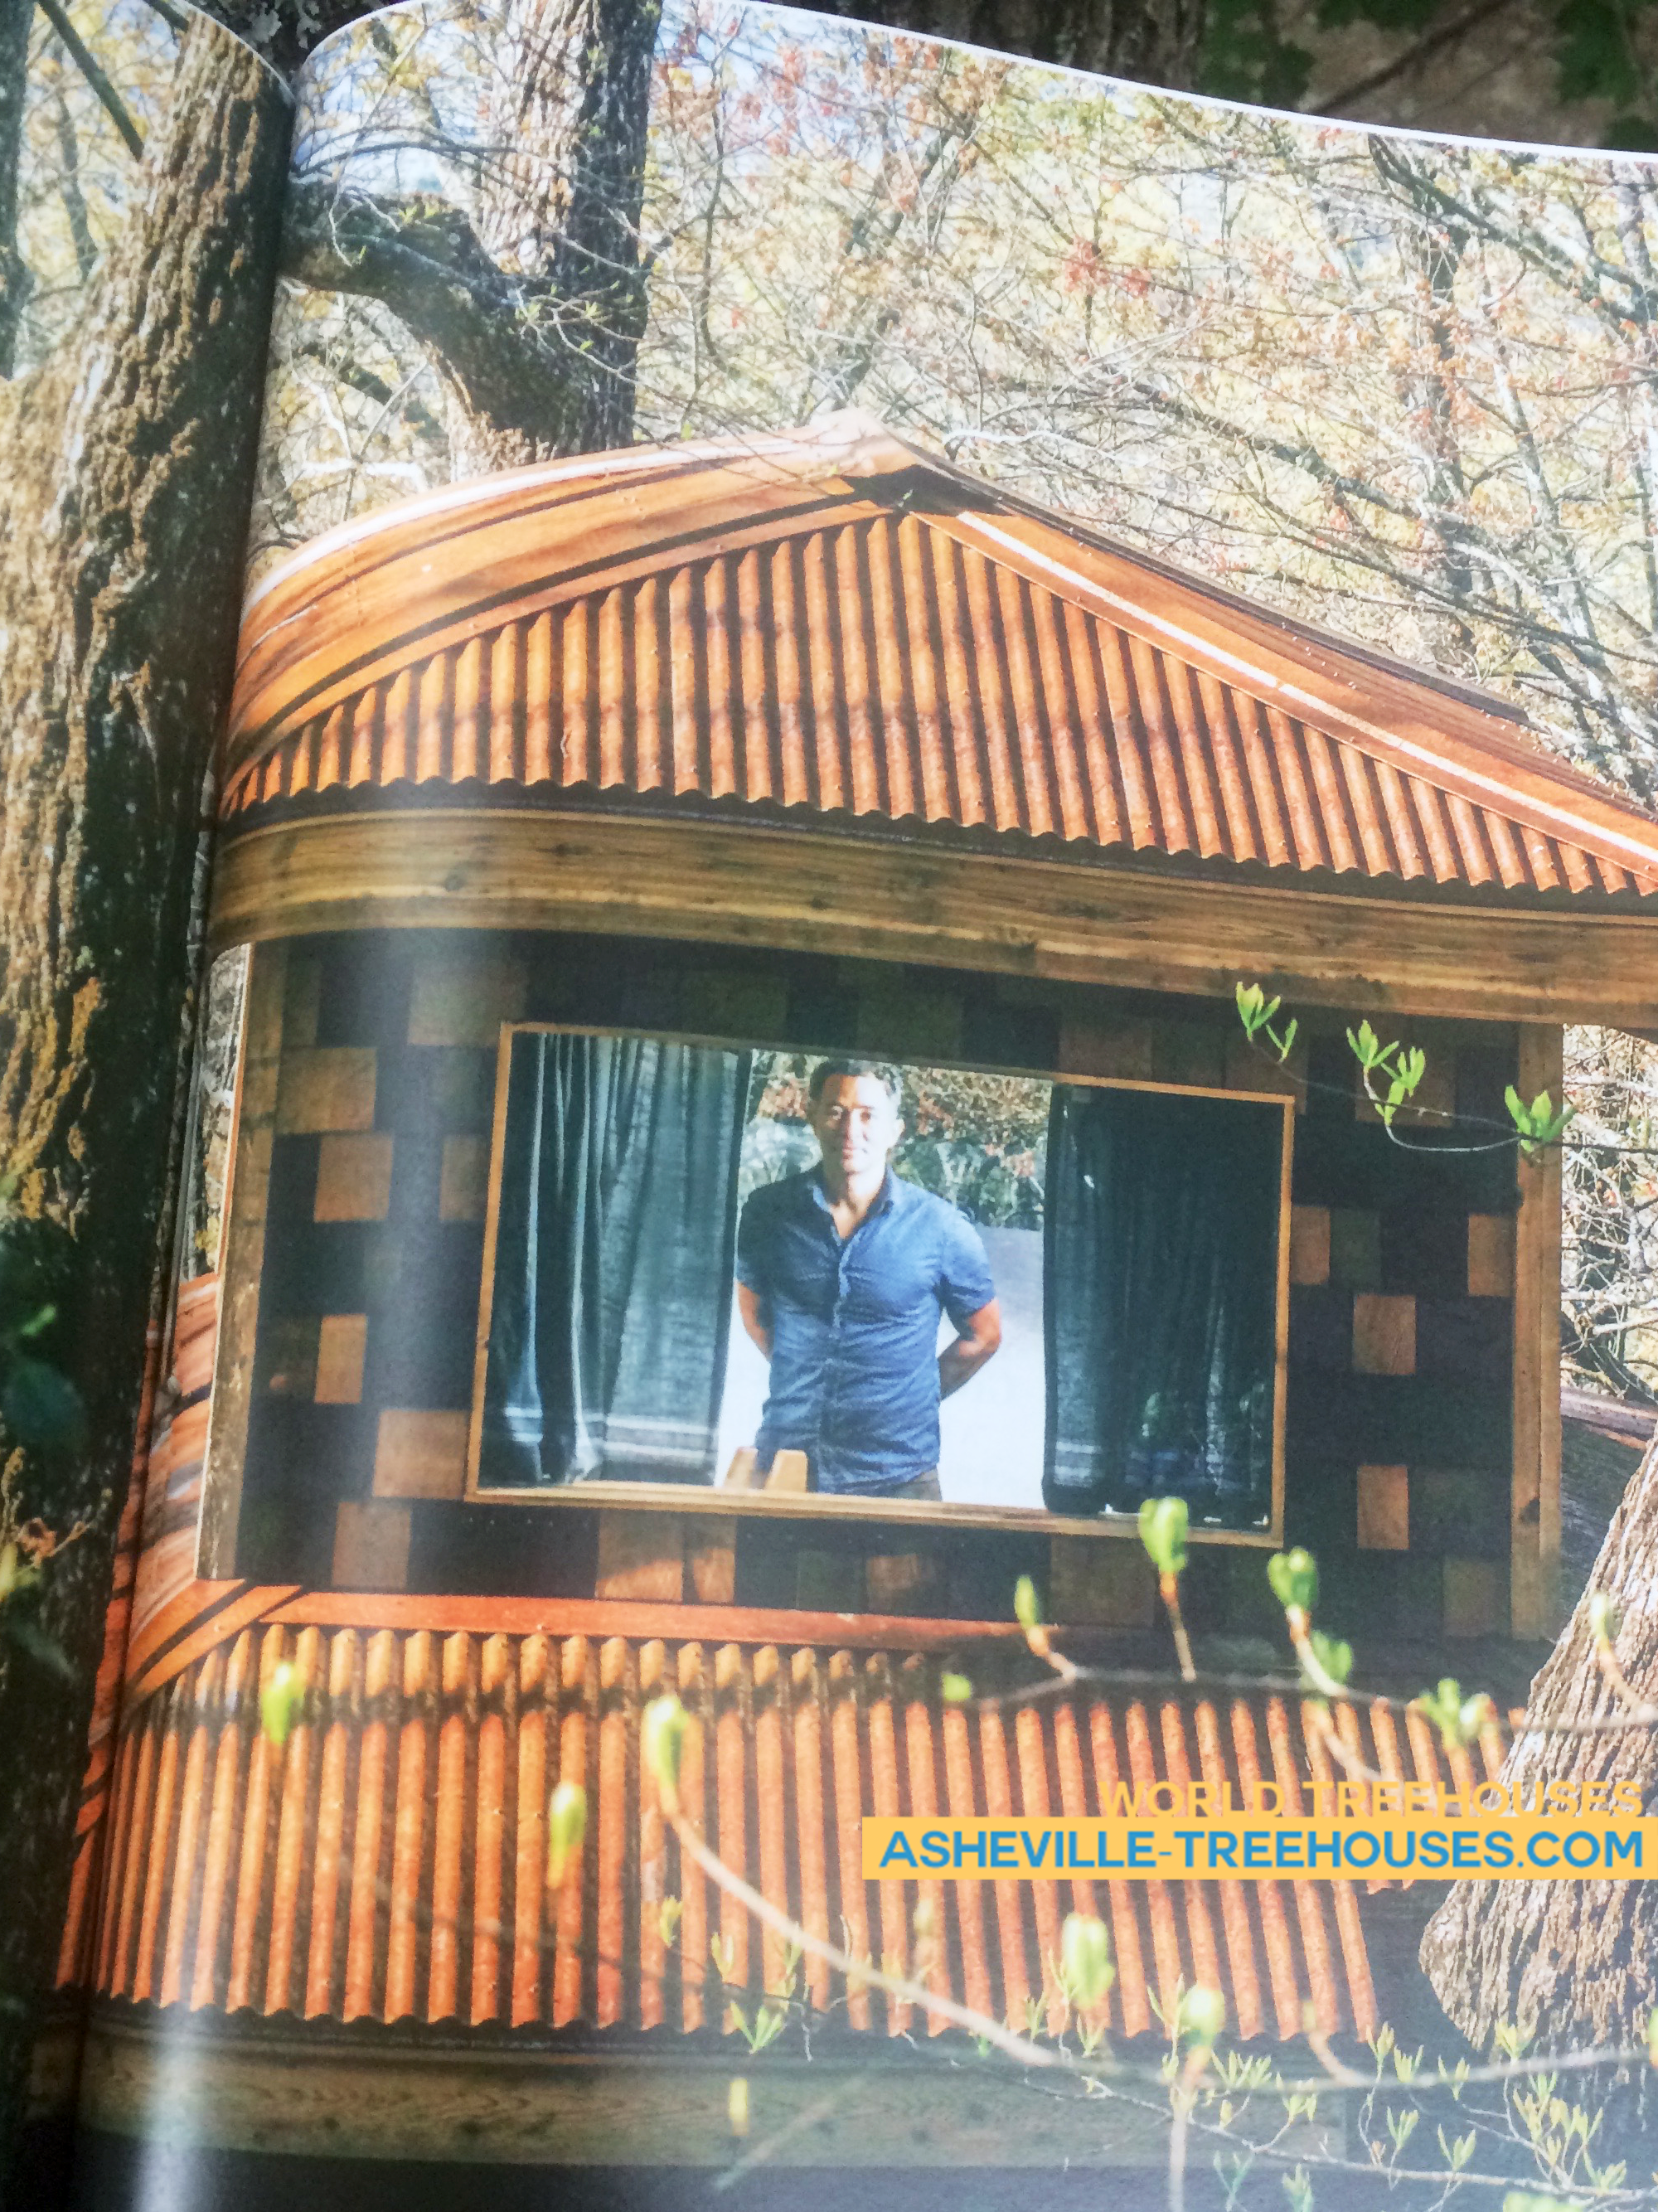 World-Treehouses-Adam-Laufer-Asheville-Capital-At-Play-2.png